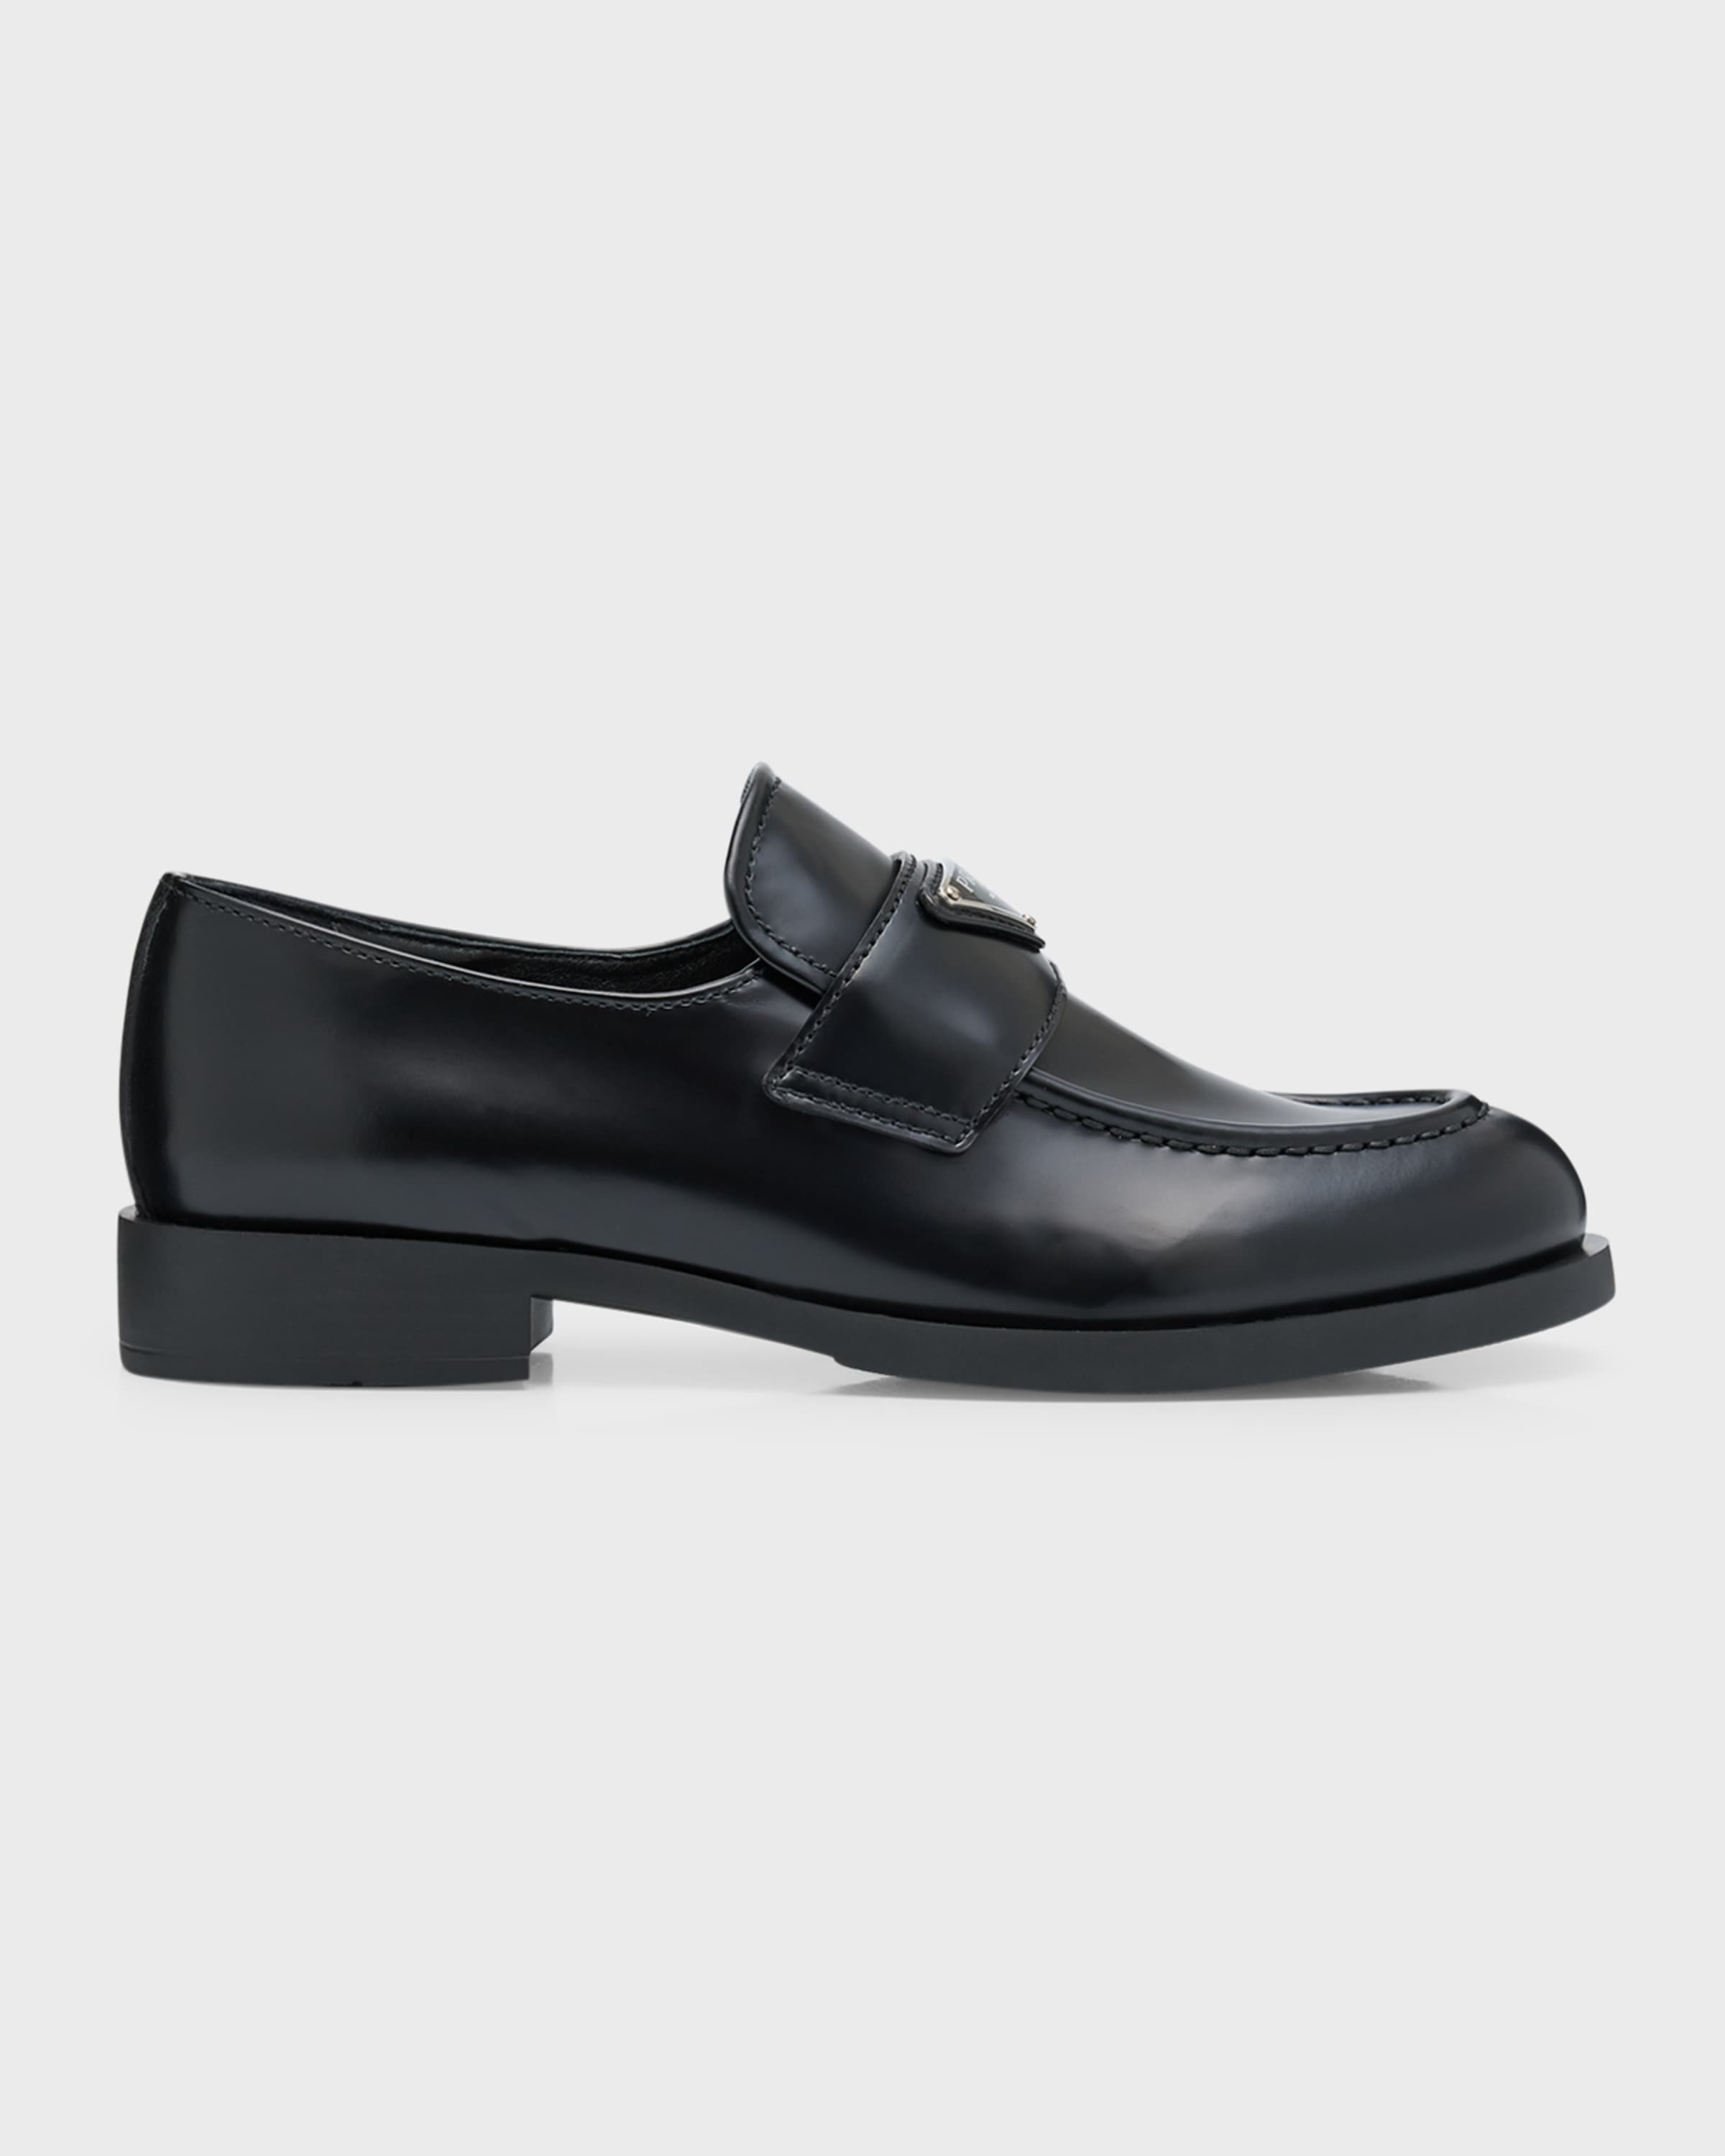 Leather Slip-On Flat Loafers - 1